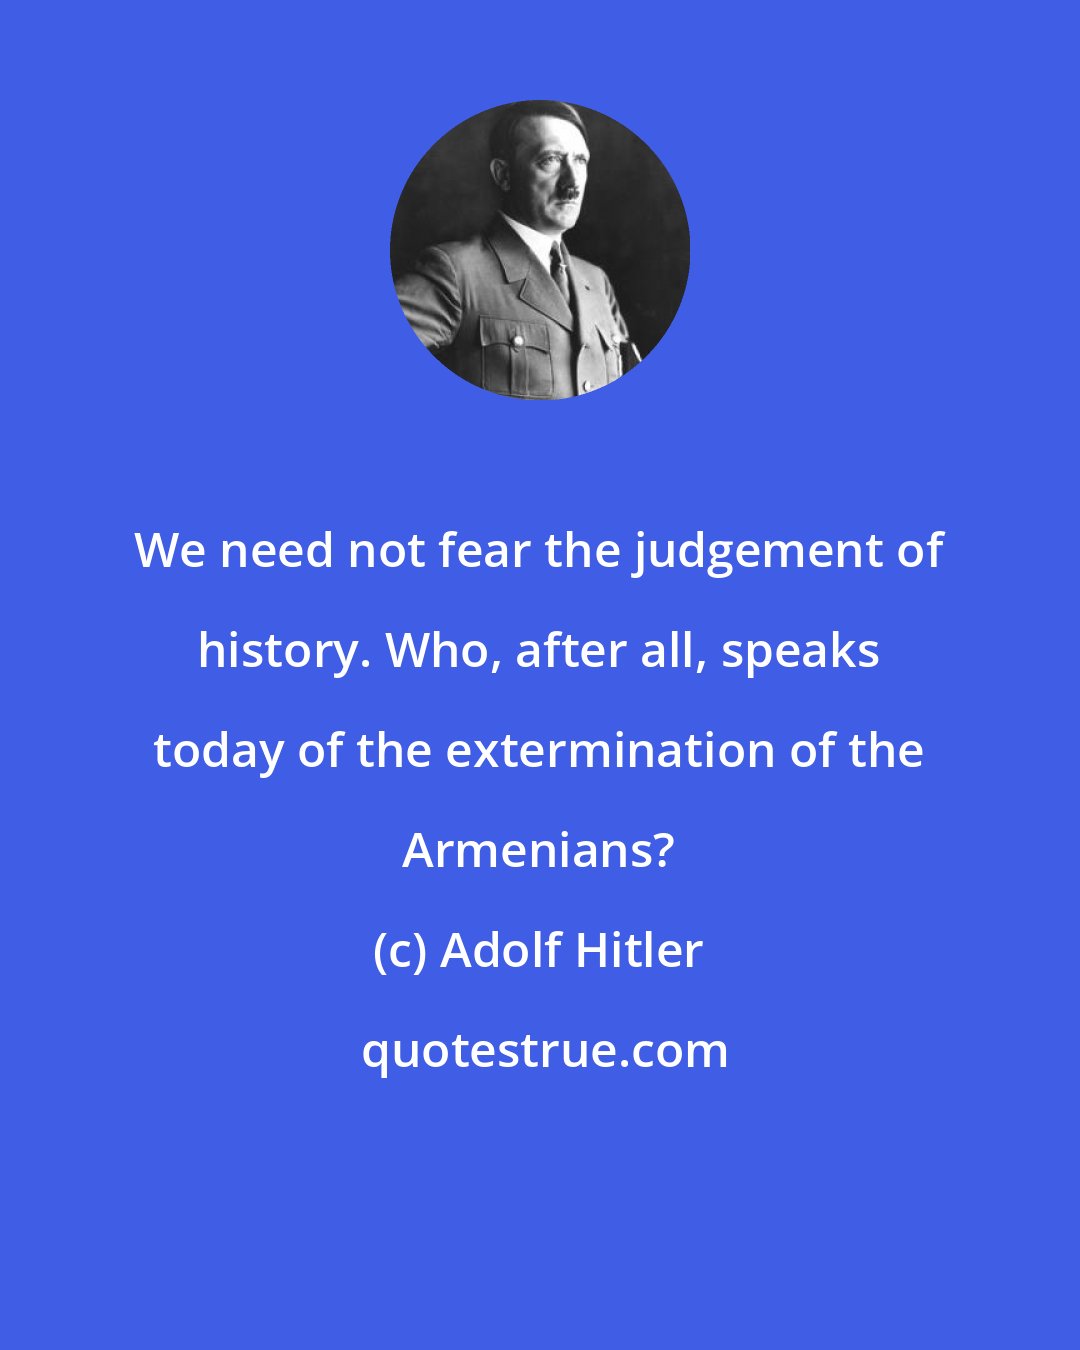 Adolf Hitler: We need not fear the judgement of history. Who, after all, speaks today of the extermination of the Armenians?